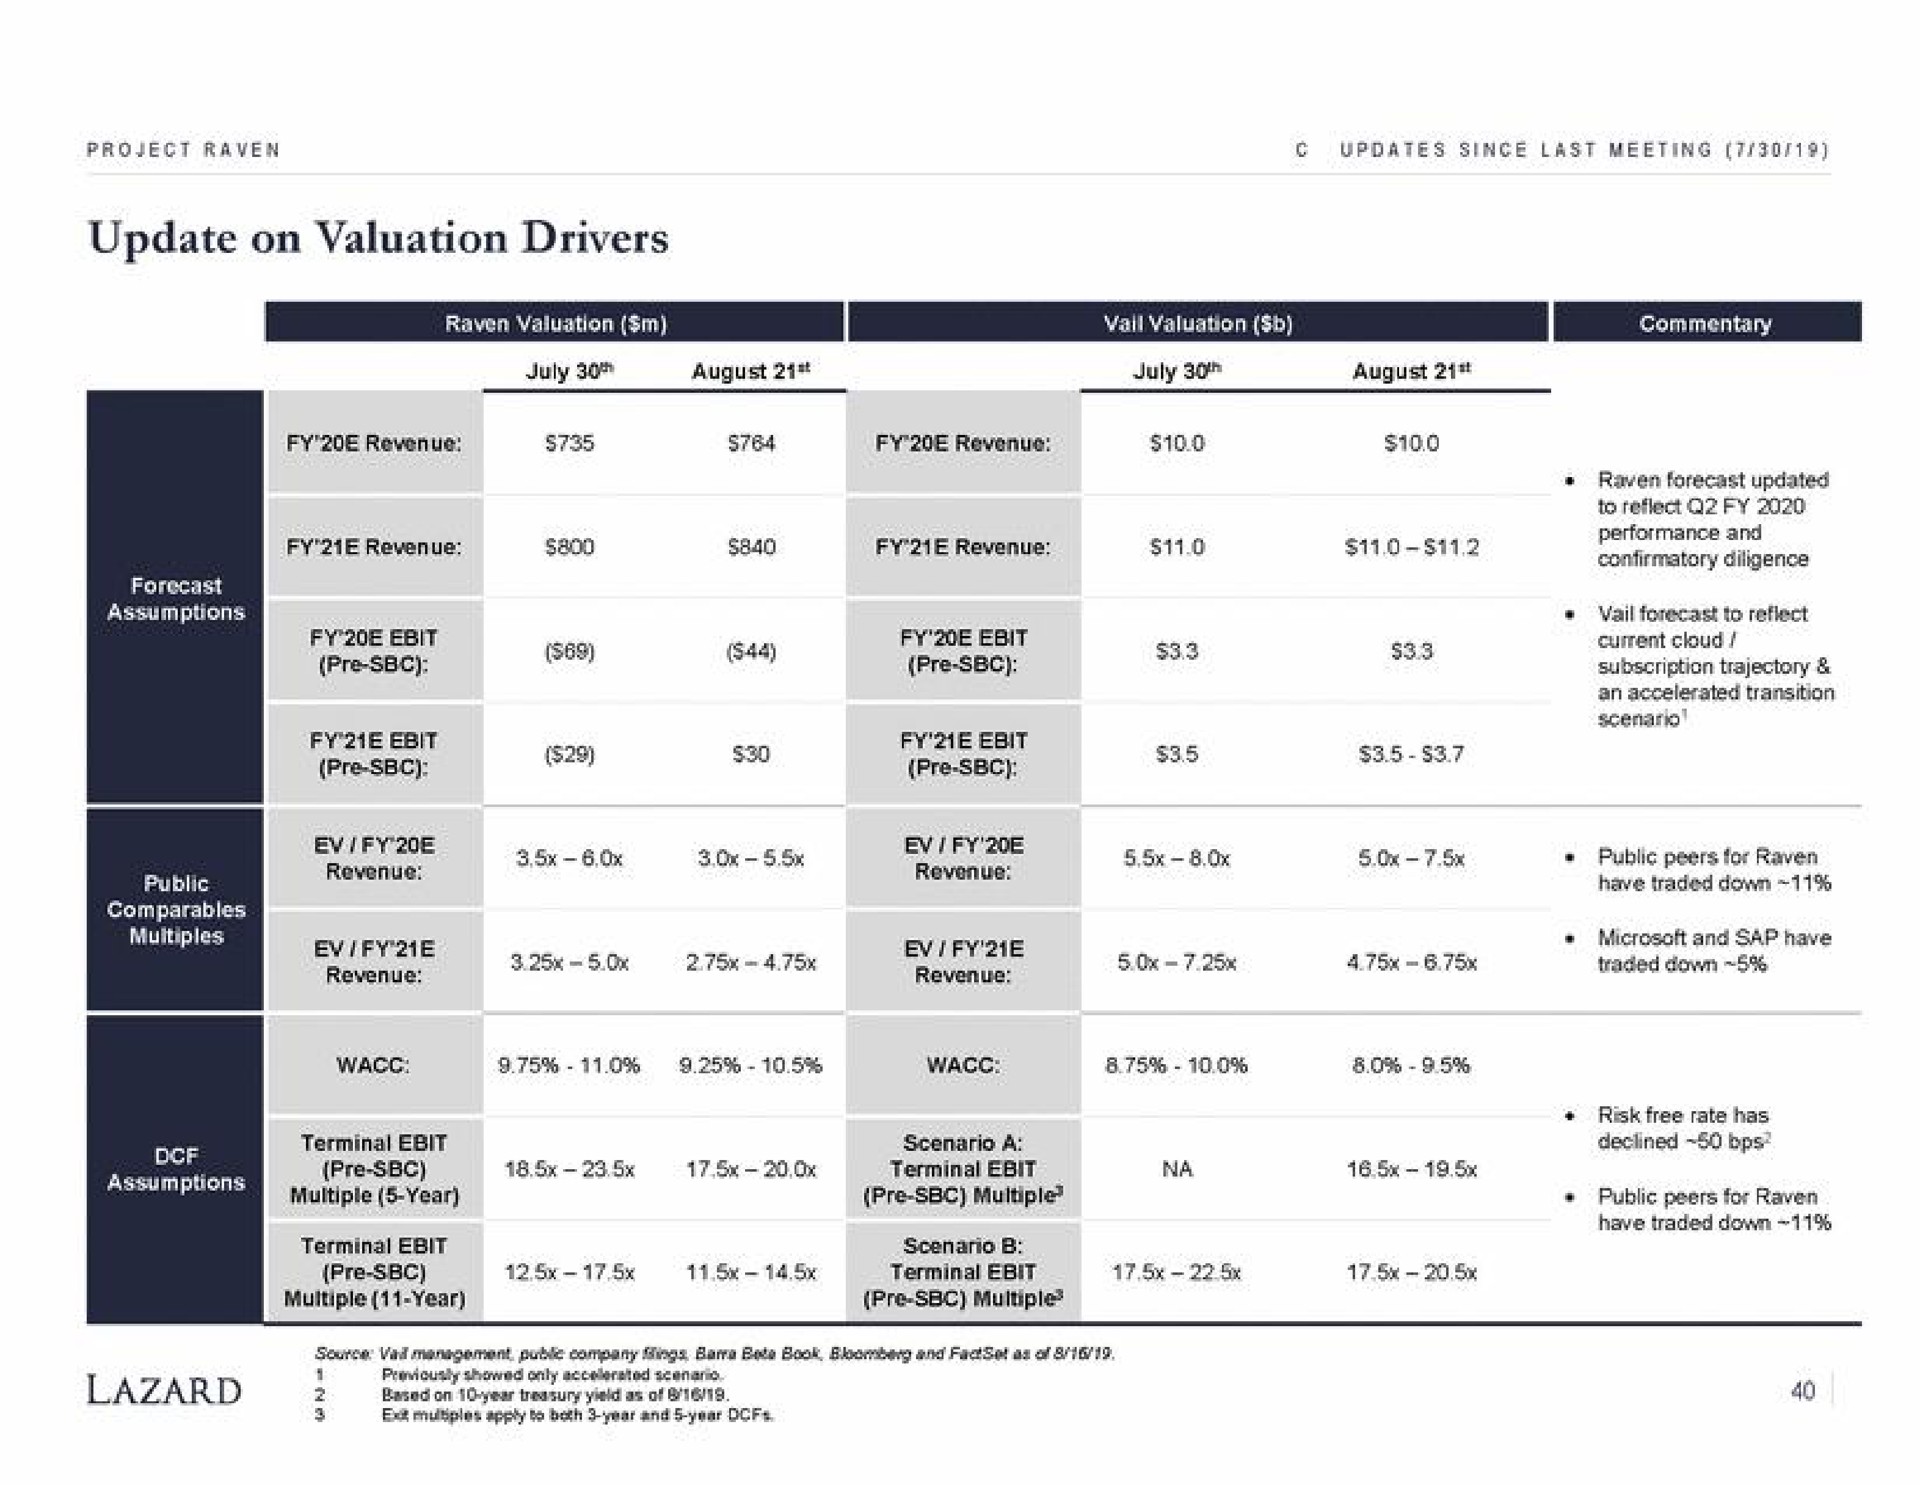 update on valuation drivers | Lazard